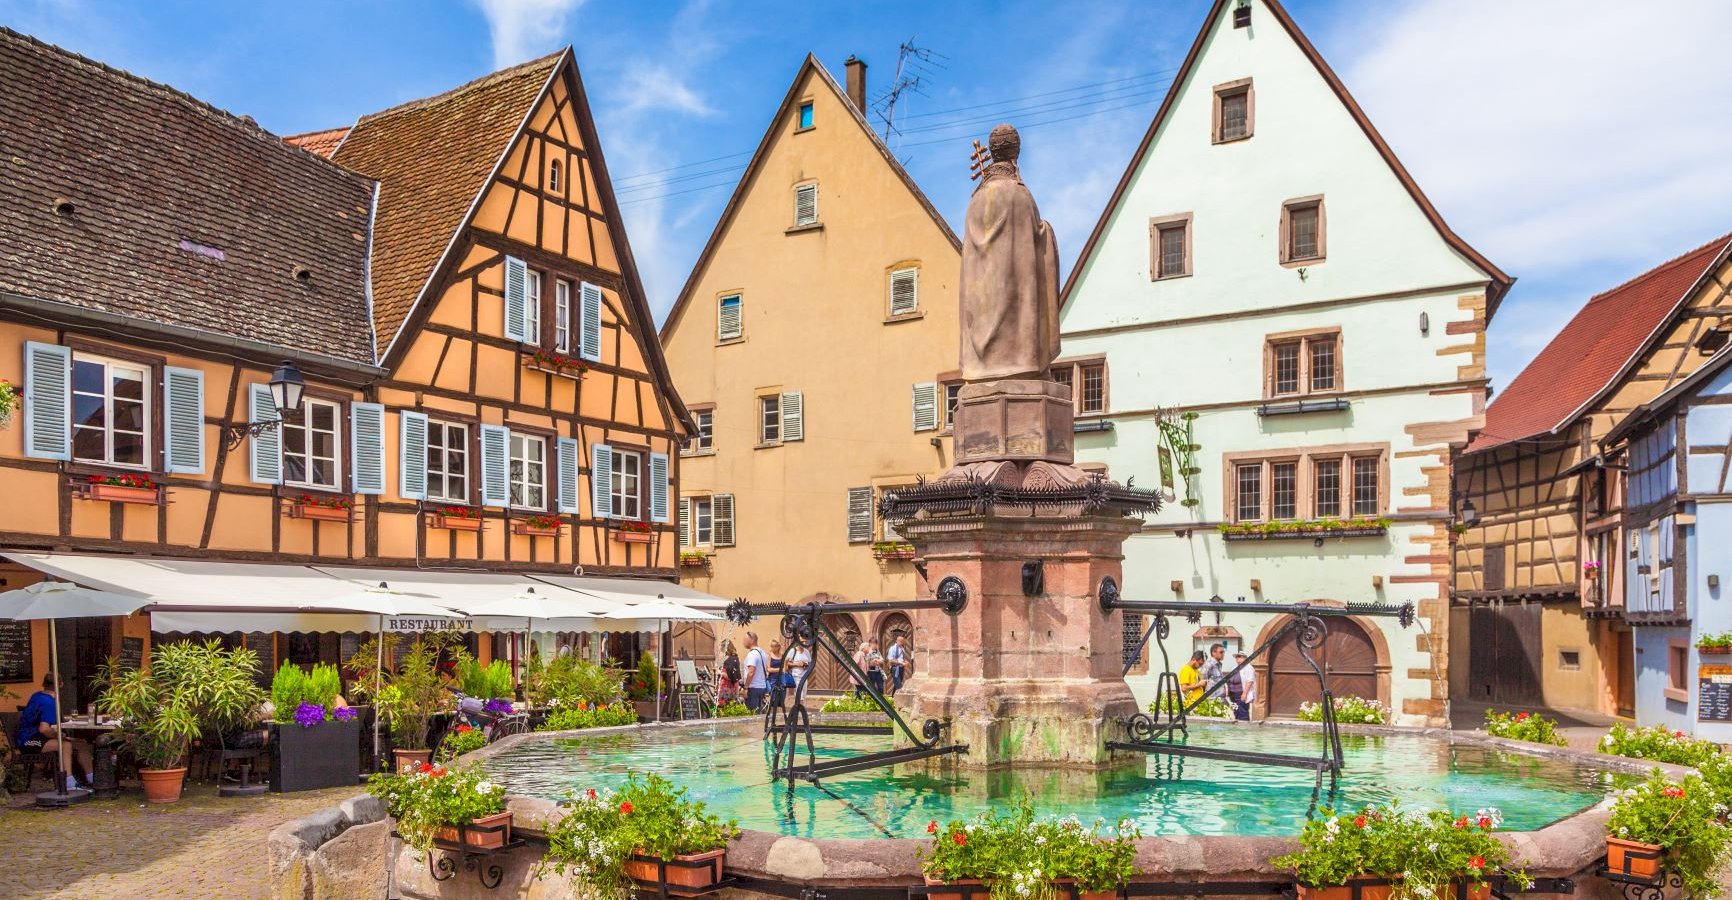 Ophorus Tours - A Private Day Trip From Strasbourg to Colmar, Riquewihr & Haut-Koenigsbourg Castle